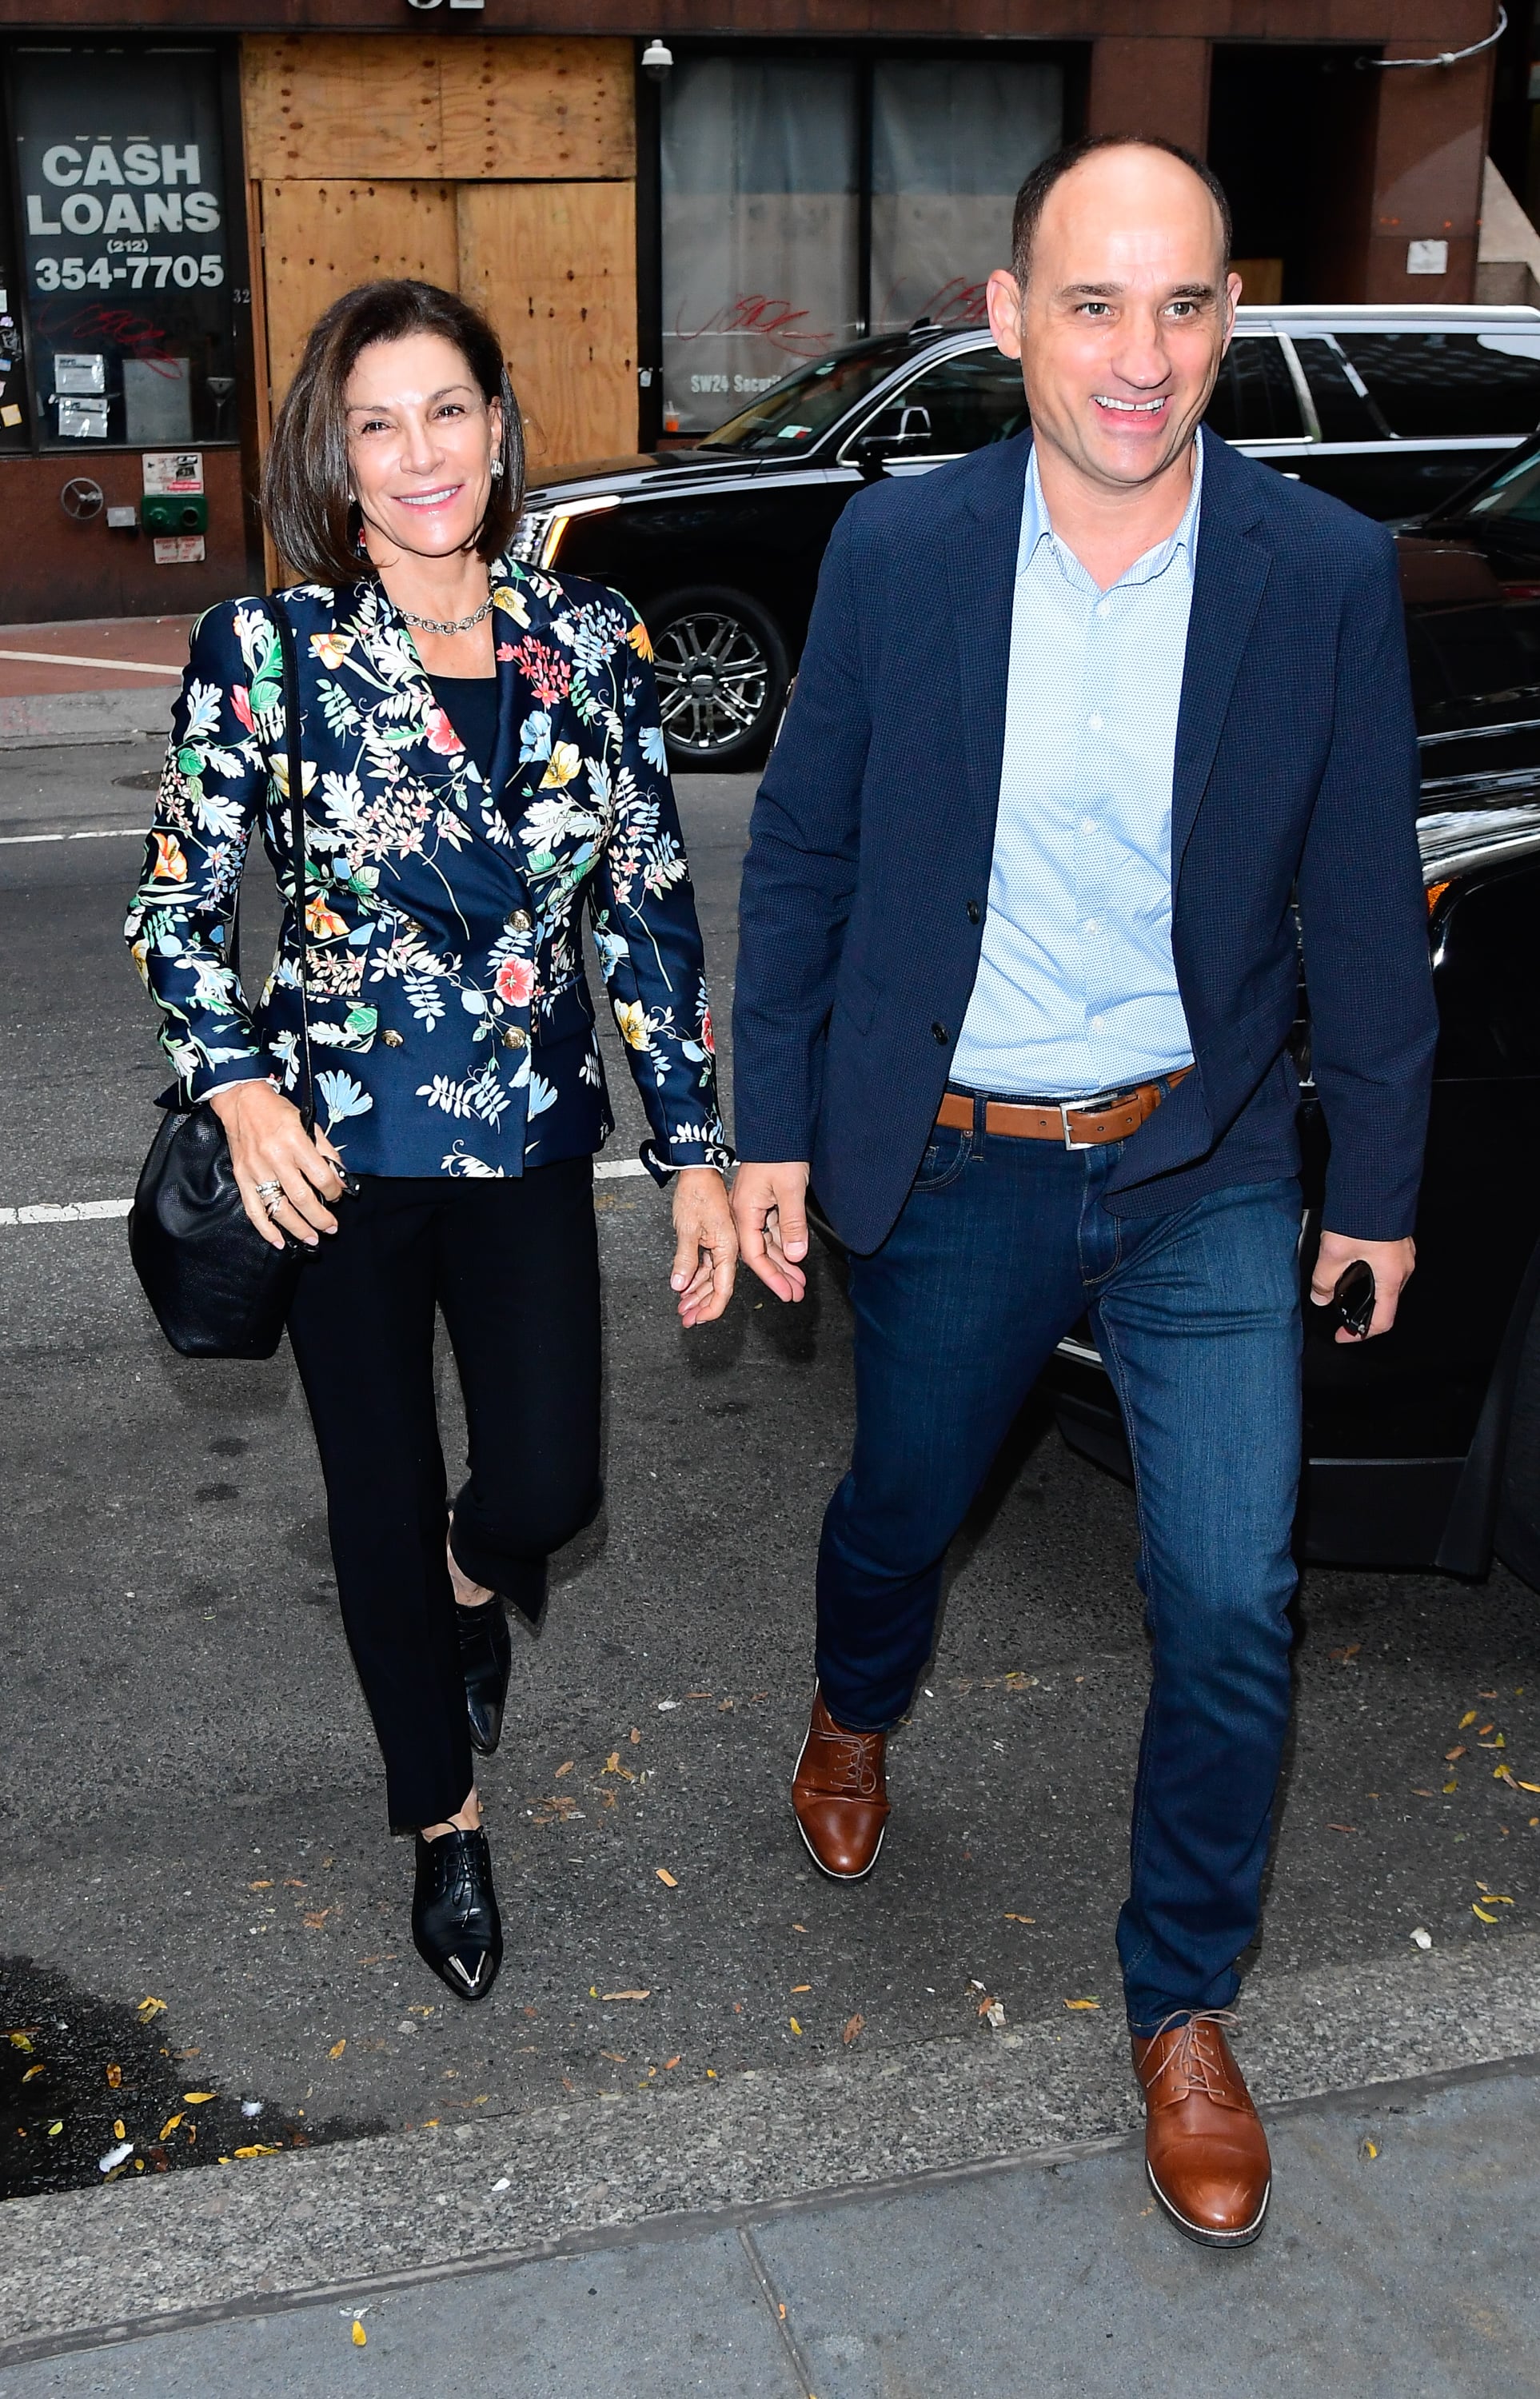 NEW YORK, NY - SEPTEMBER 16:  Hilary Farr and David Visentin are seen outside the Today show on September 16, 2019 in New York City.  (Photo by Raymond Hall/GC Images)